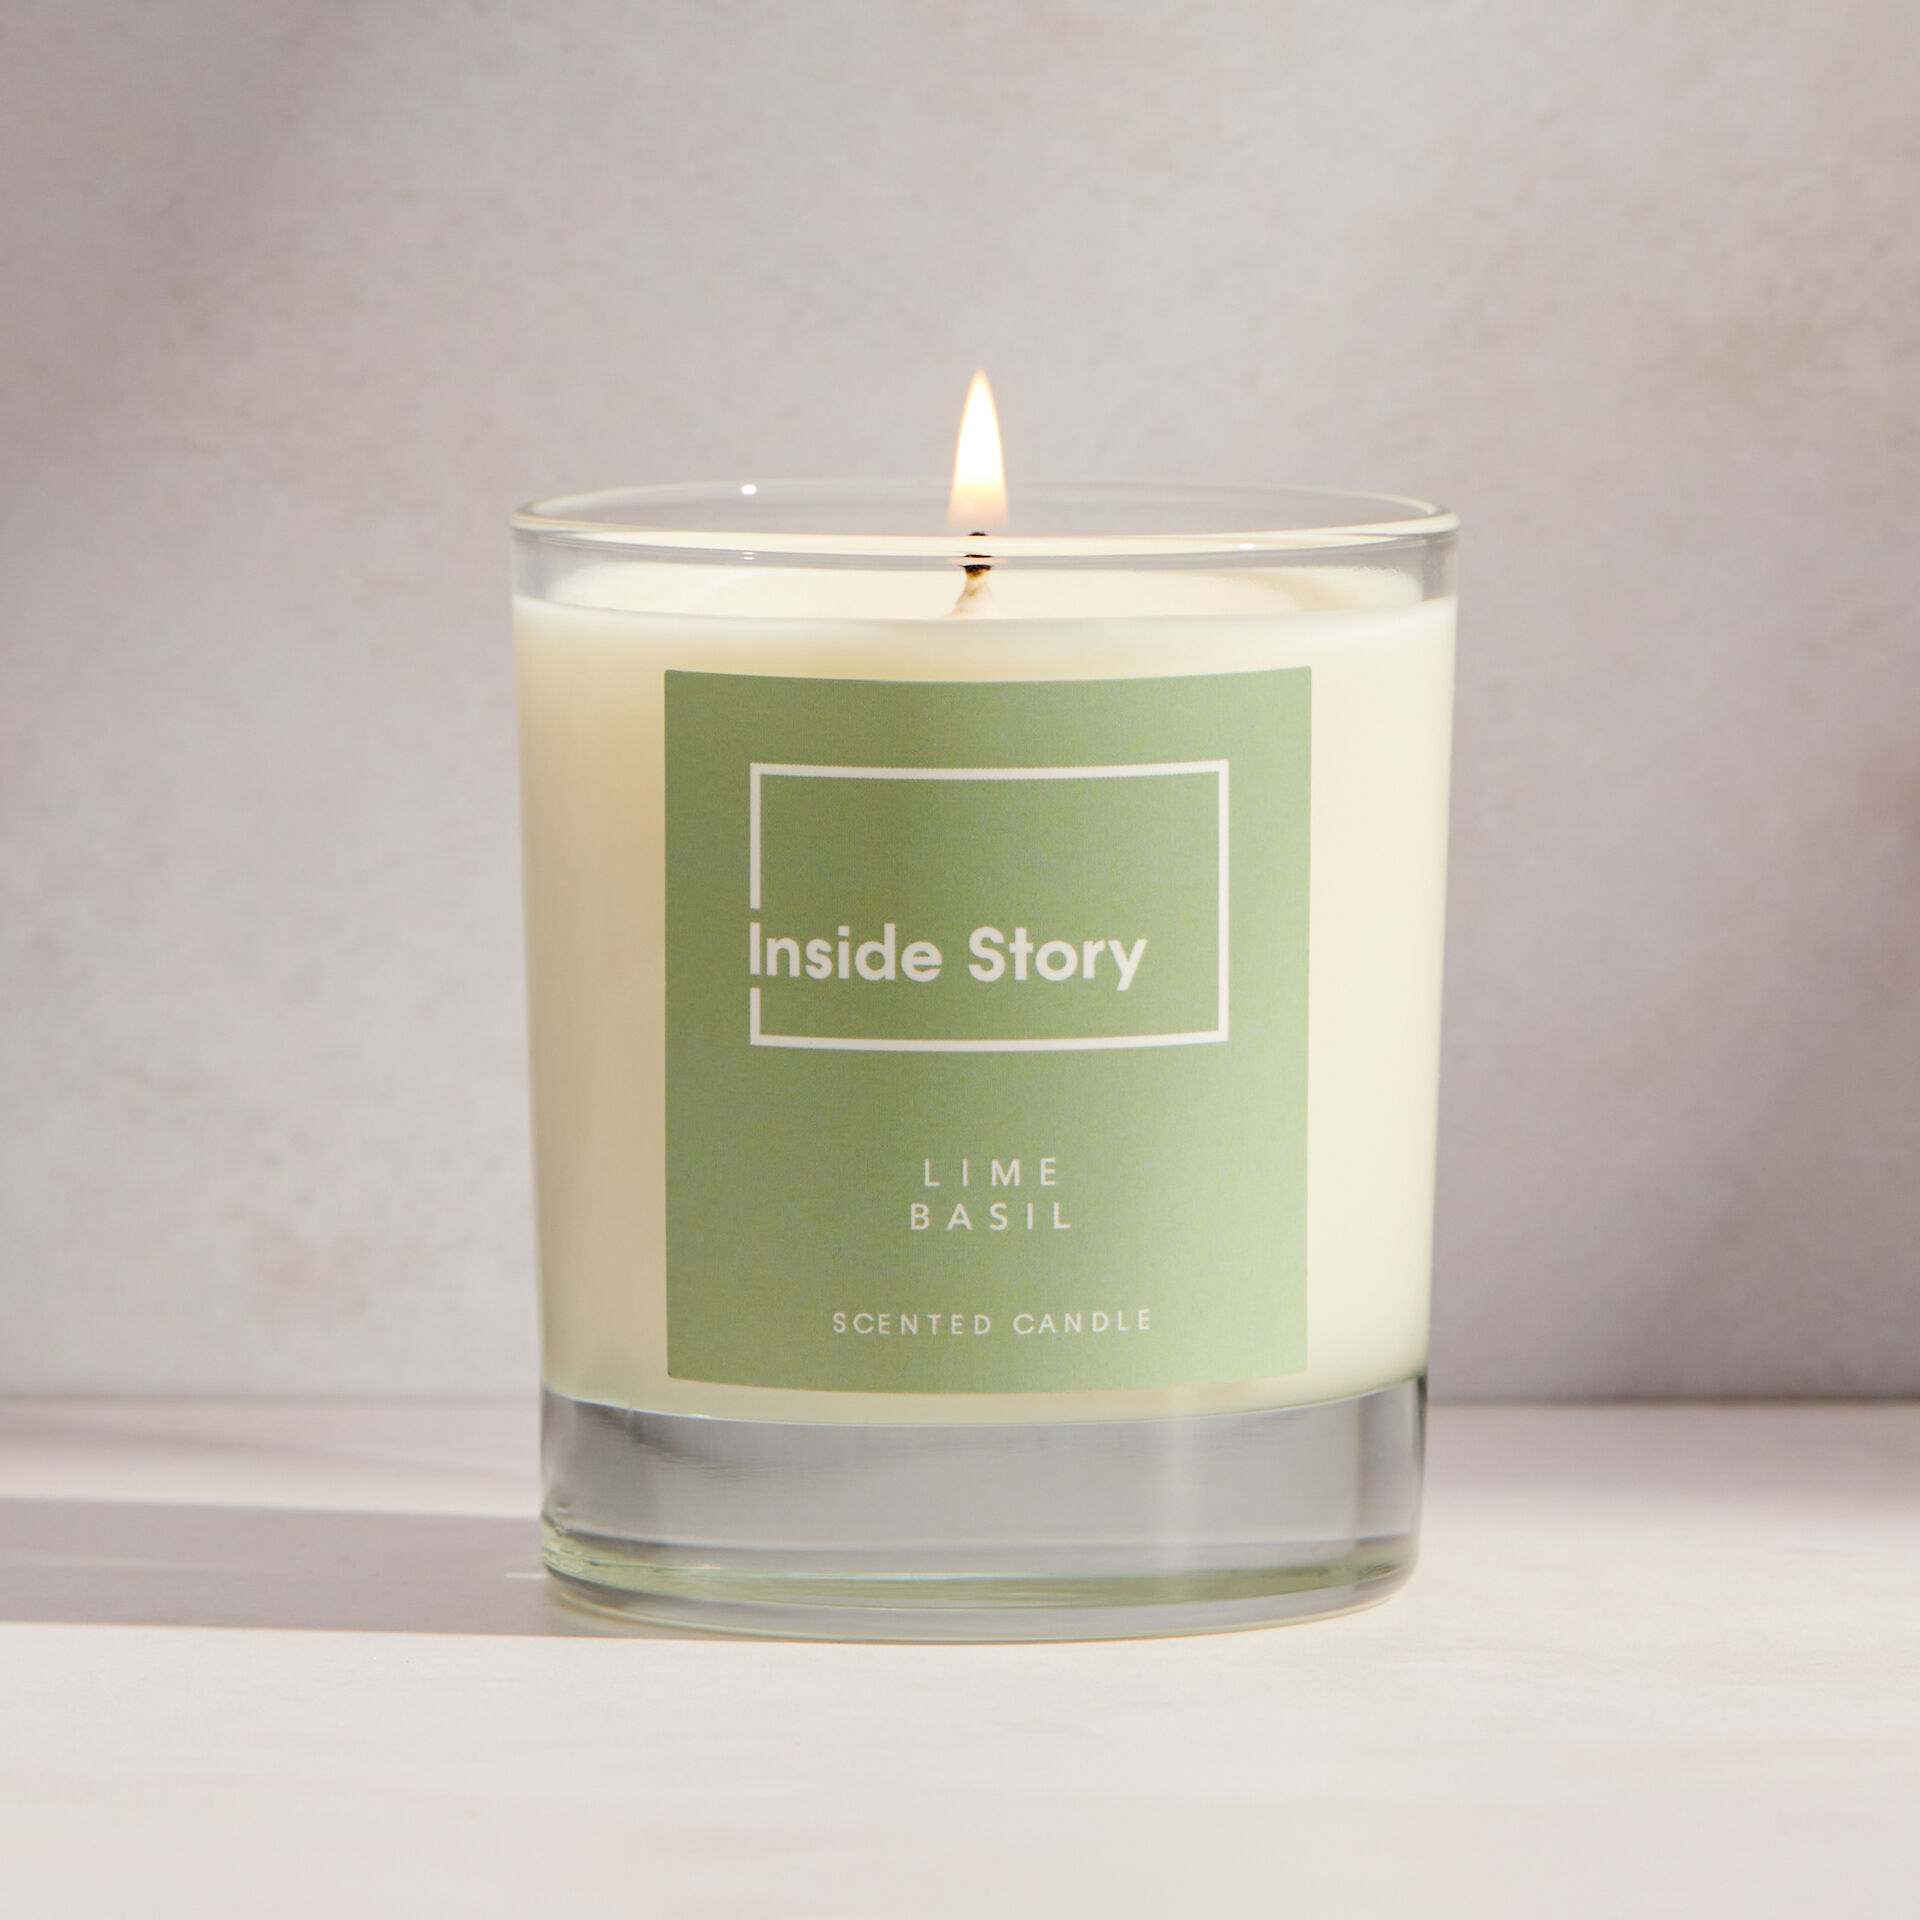 ${product-id}-Lime Basil Scented Signature Candle-Neutral-${view-type}